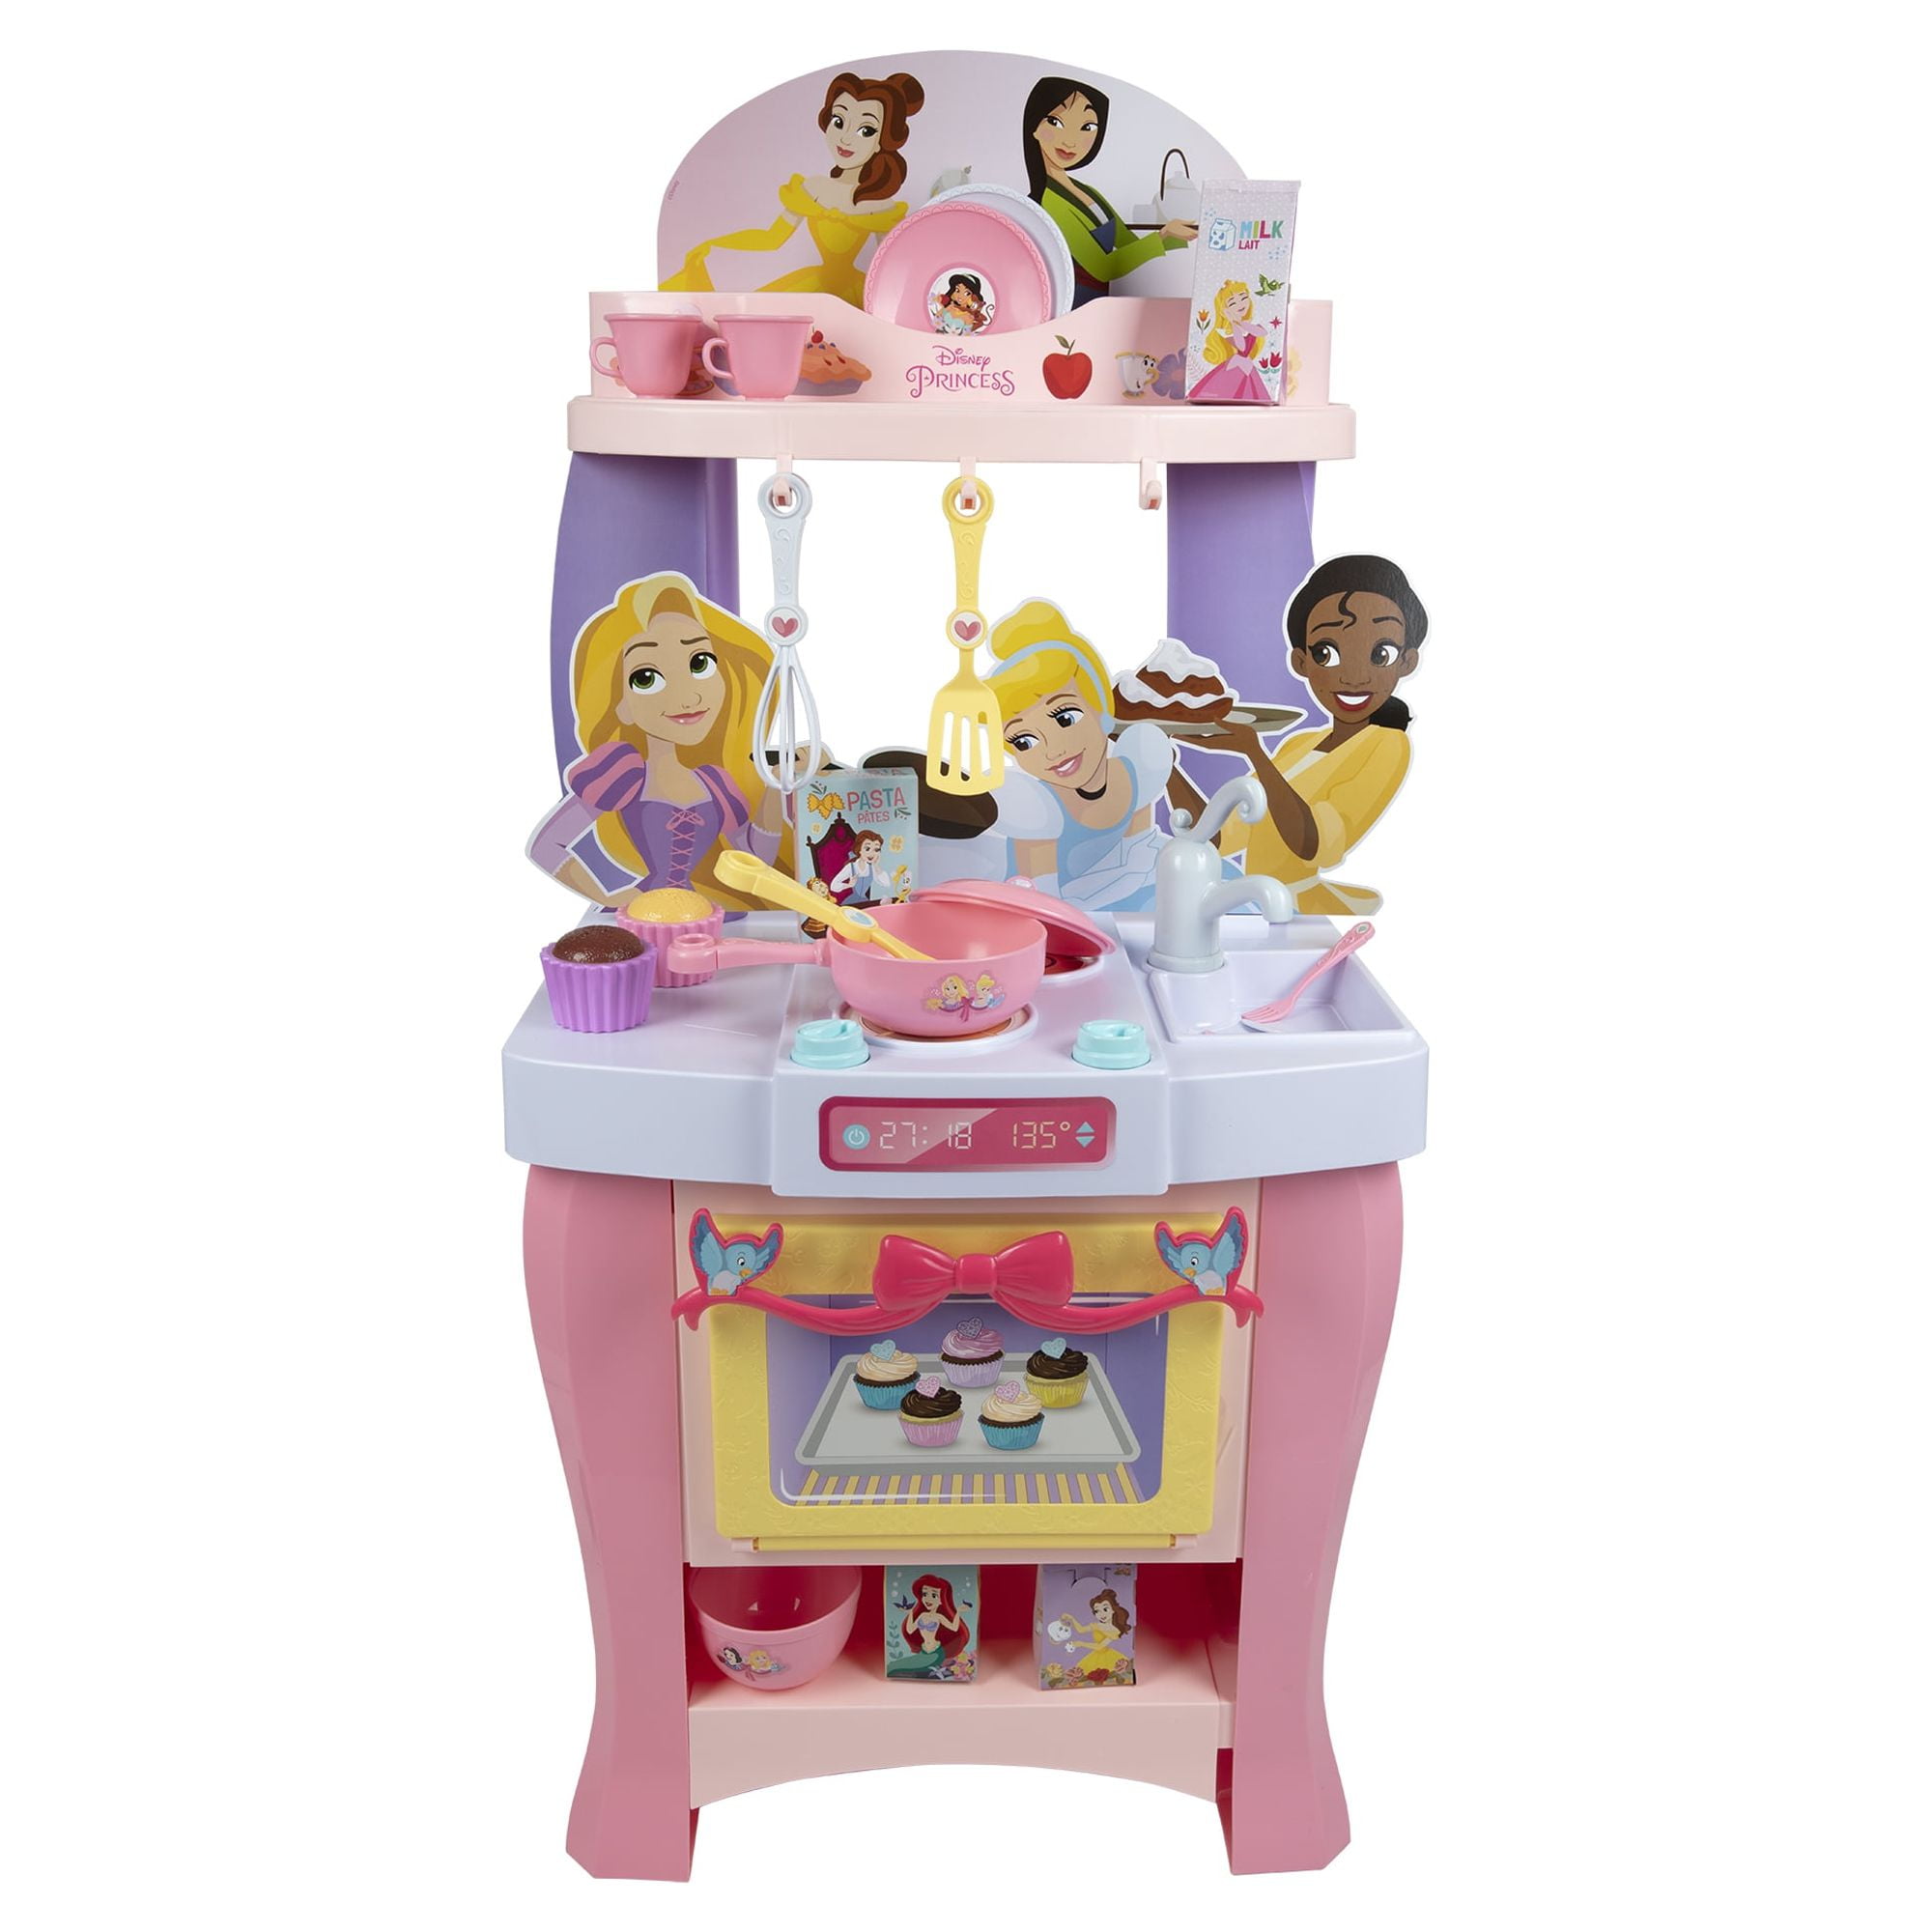 New Disney Princess Play Kitchen Includes 20 Accessories, over 3 Feet Tall